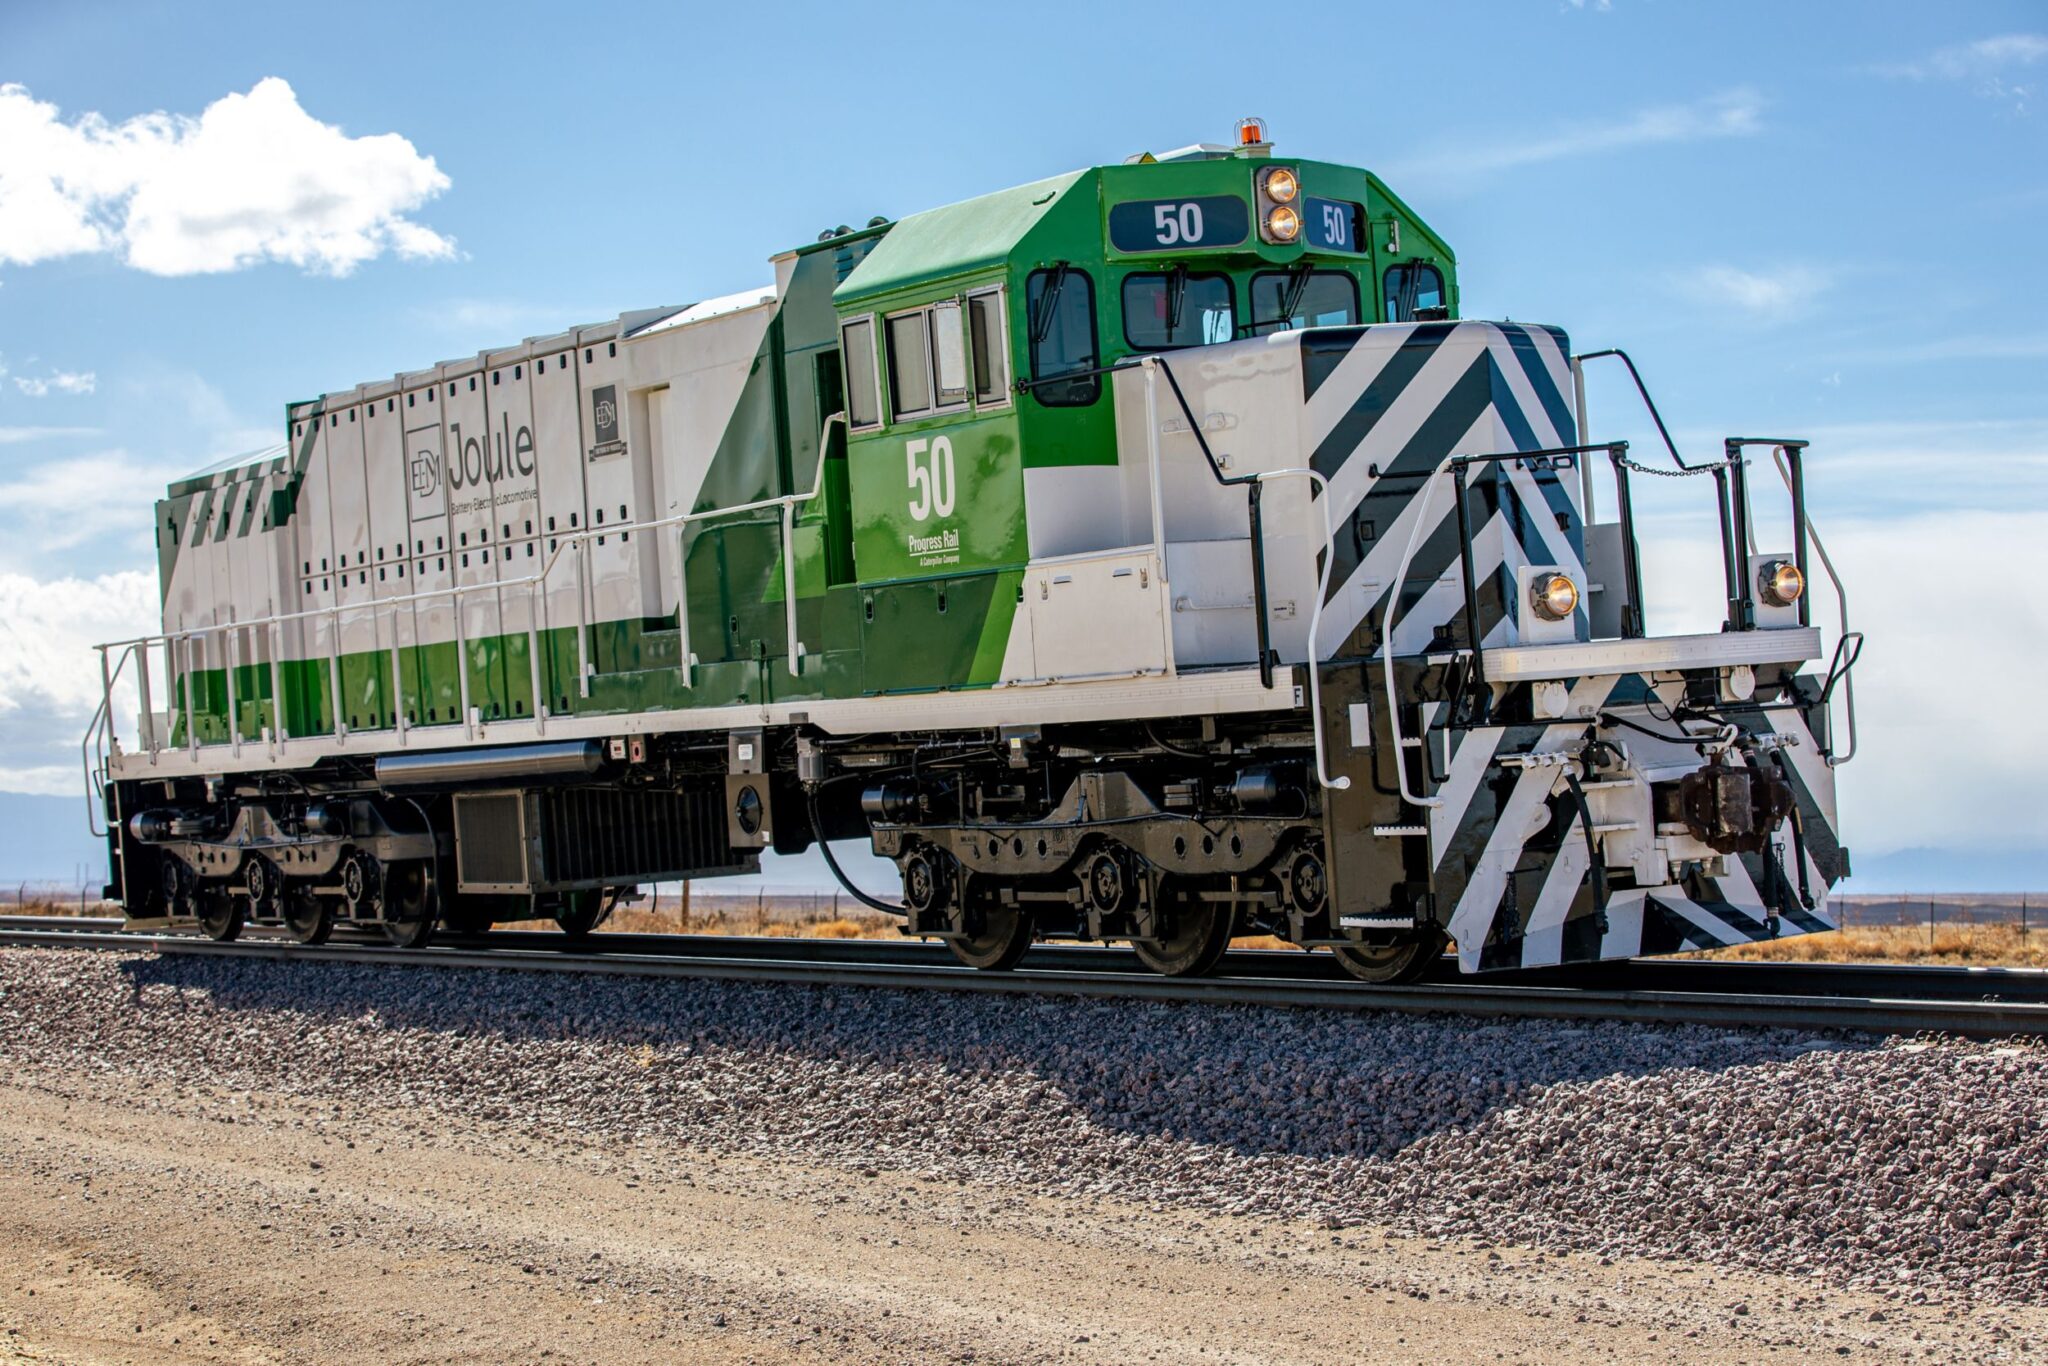 The battery-powered locomotive EMD Joule